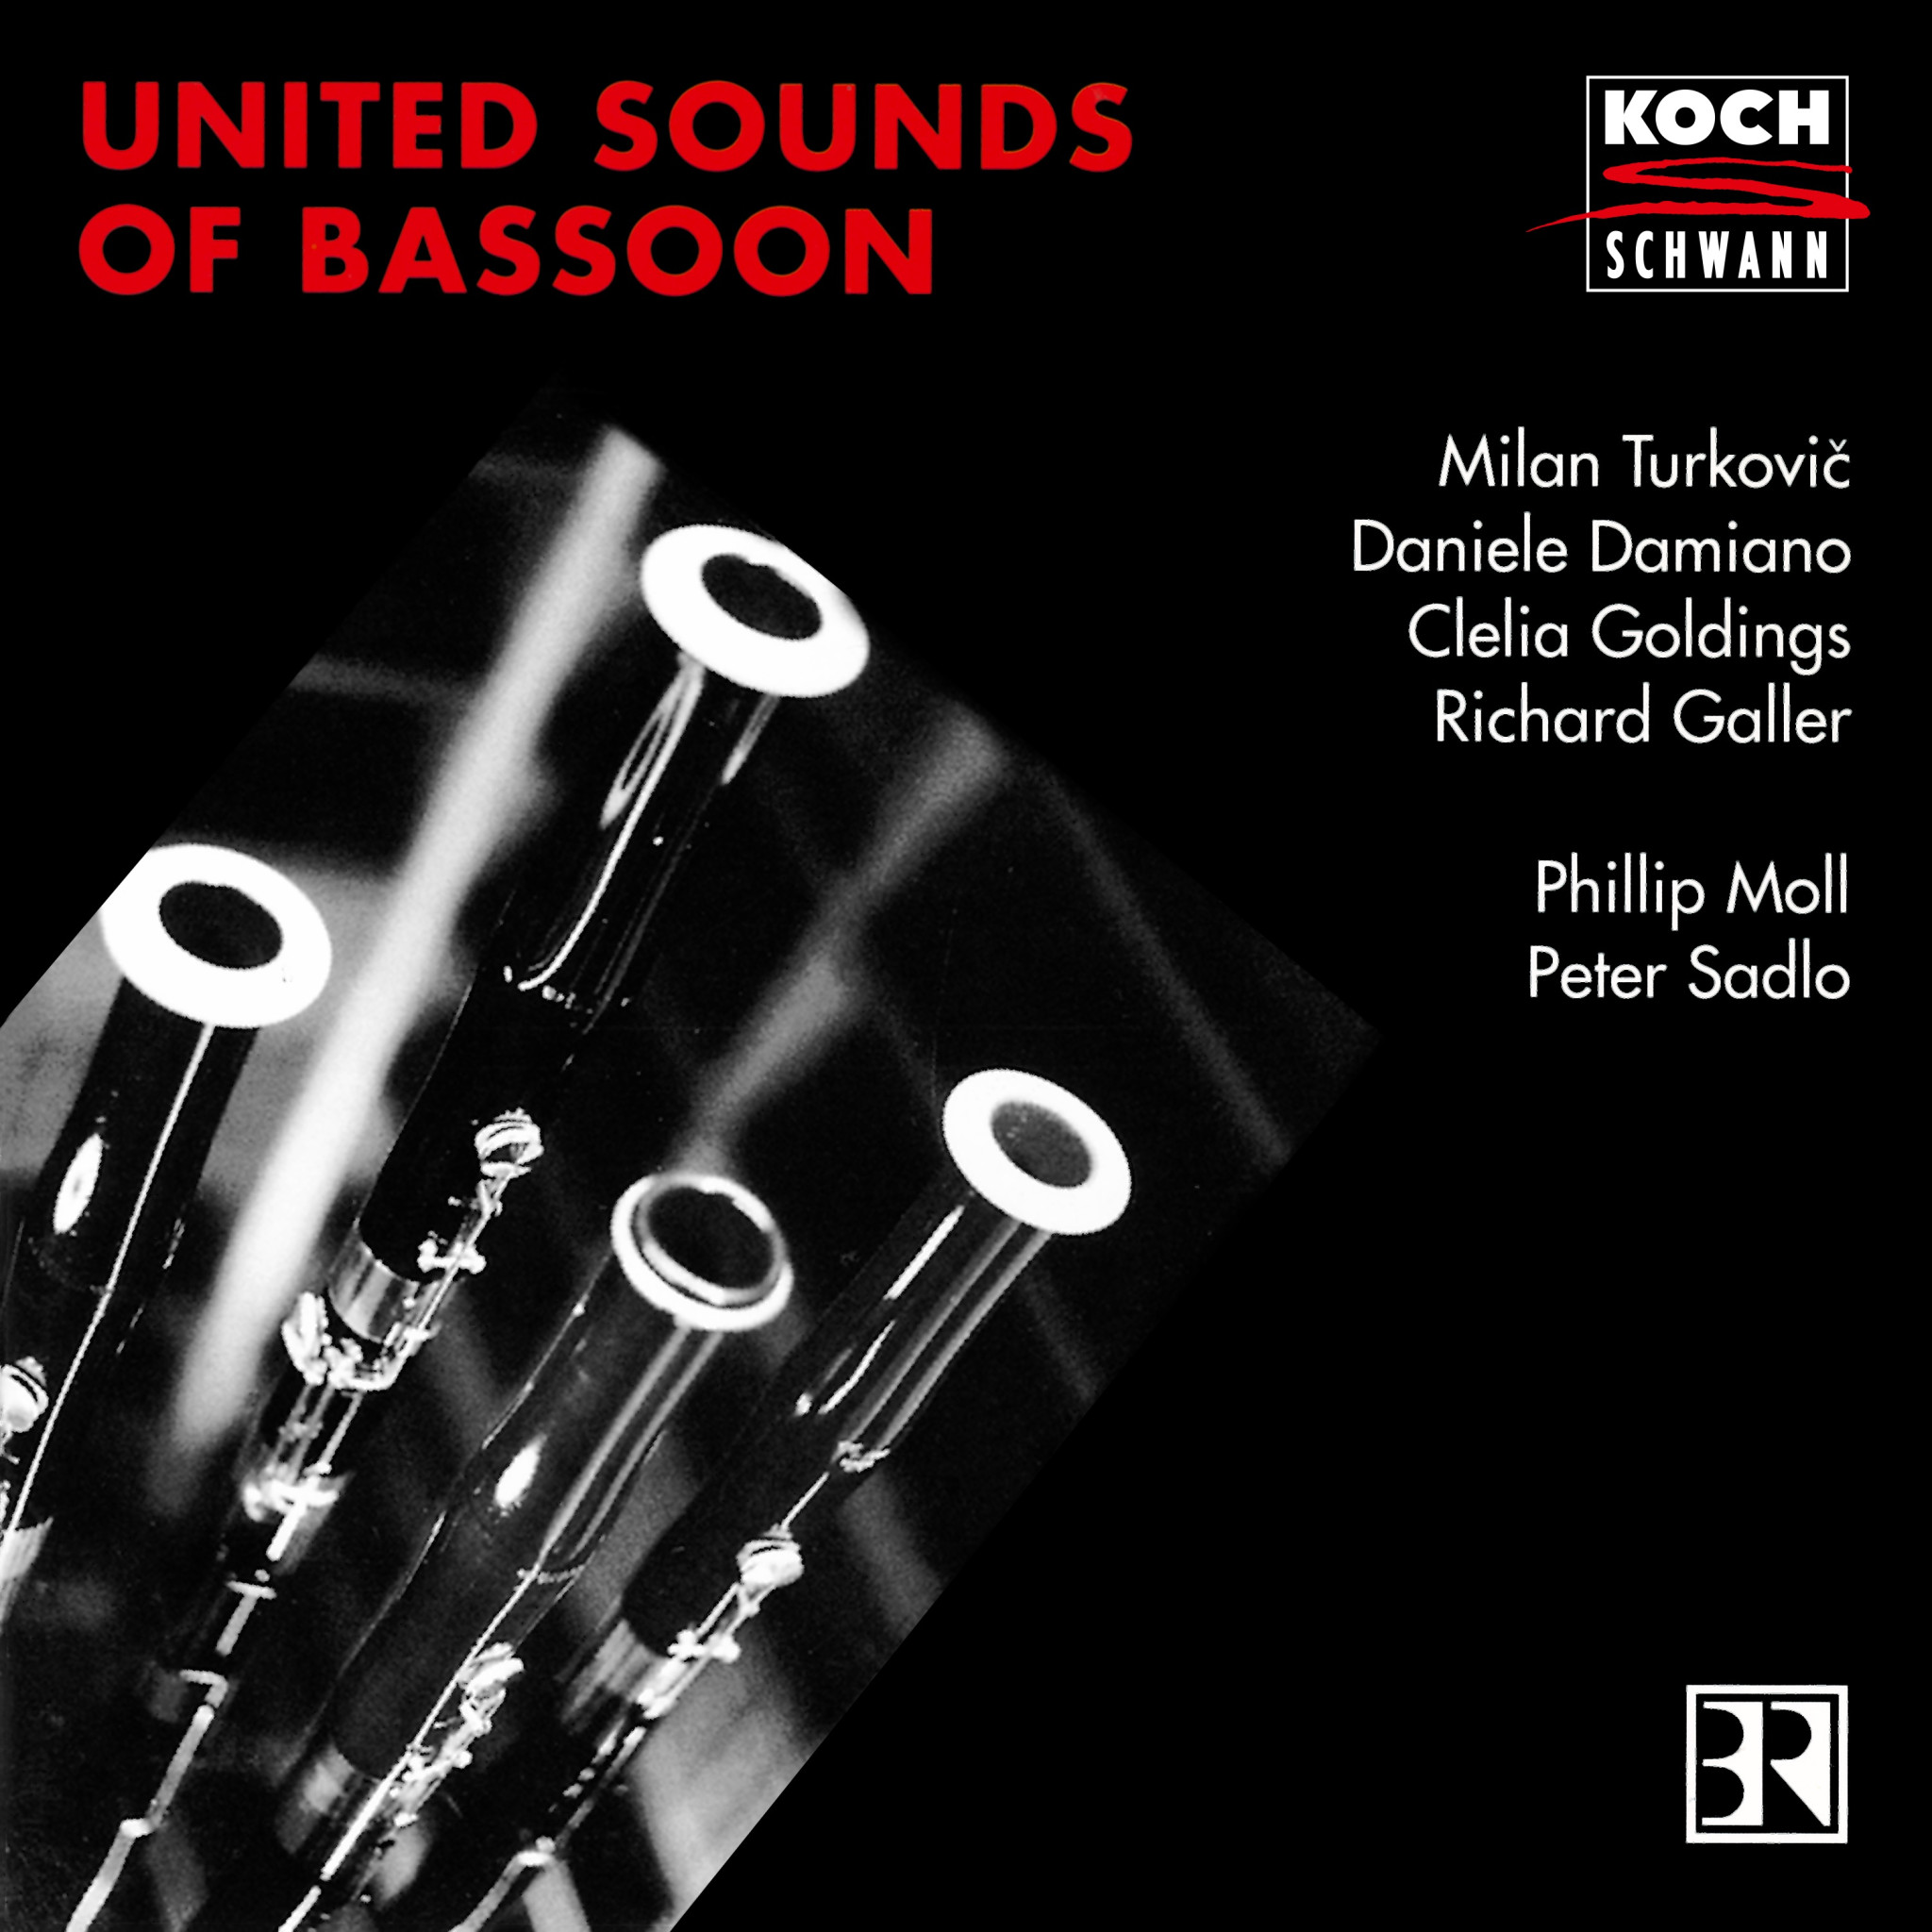 United Sounds of Bassoon